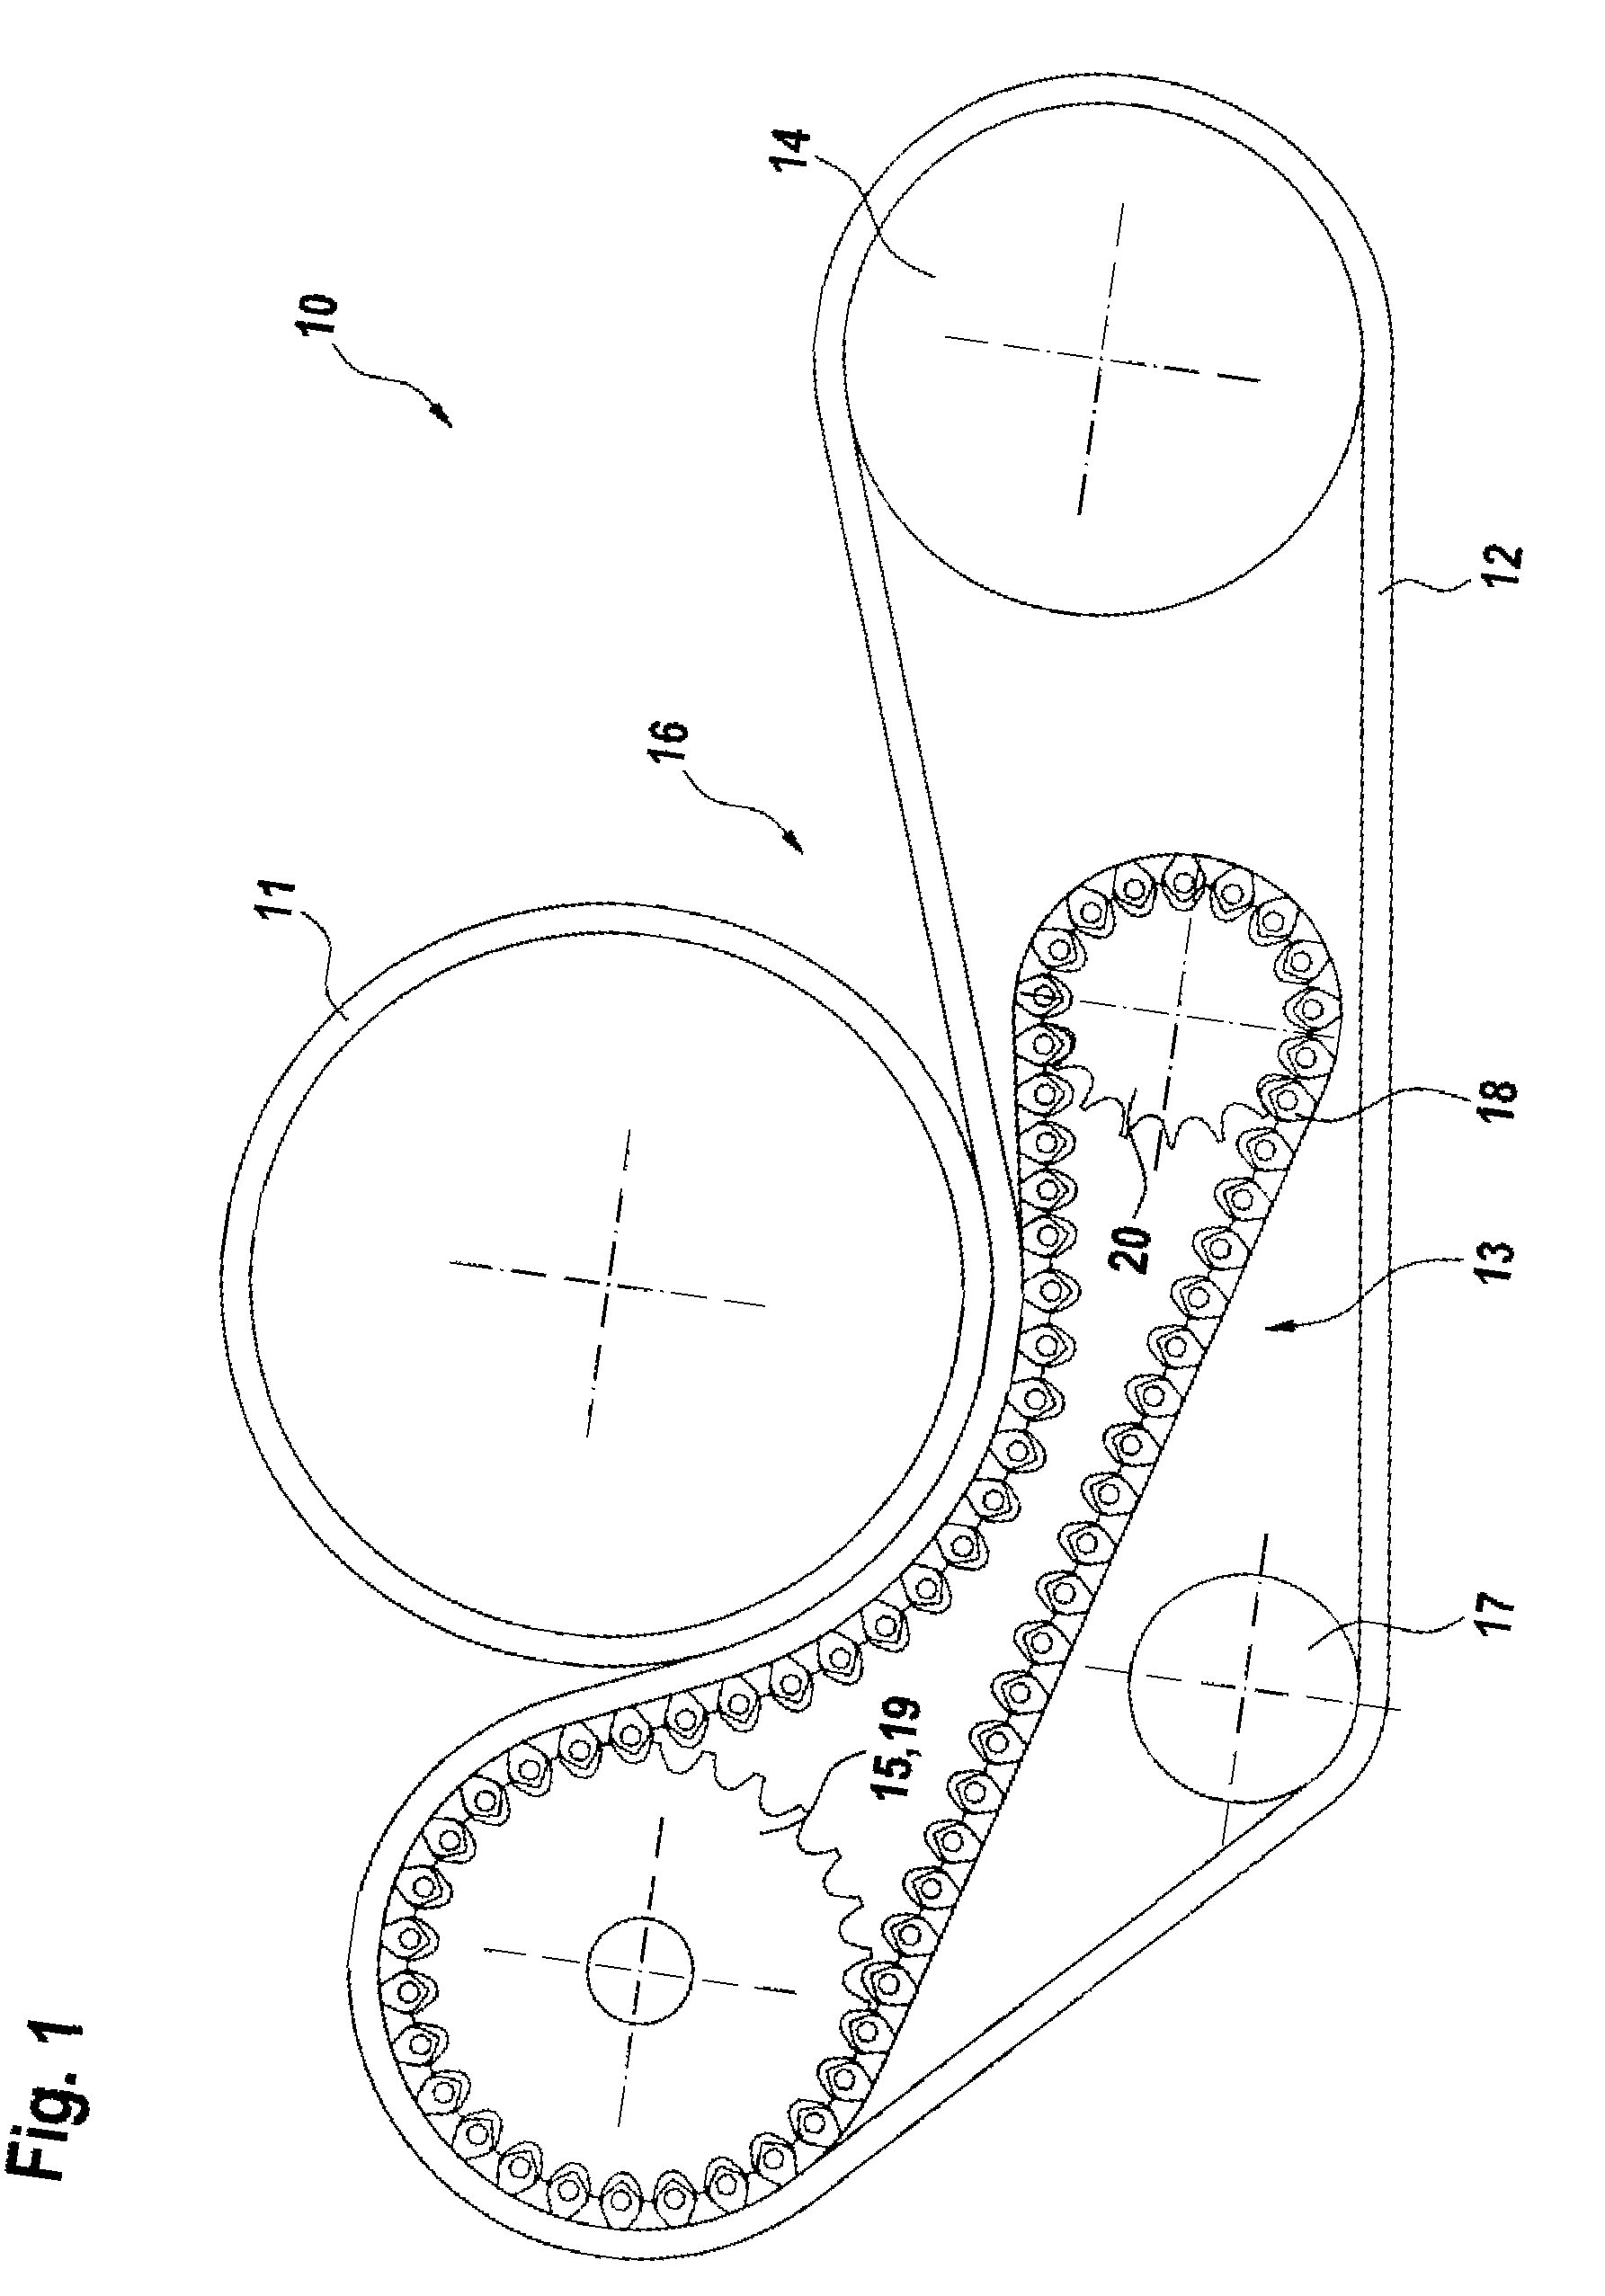 Support Chain with Wear Protection for a Support Device for Separating Substances Having Different Flowabilities